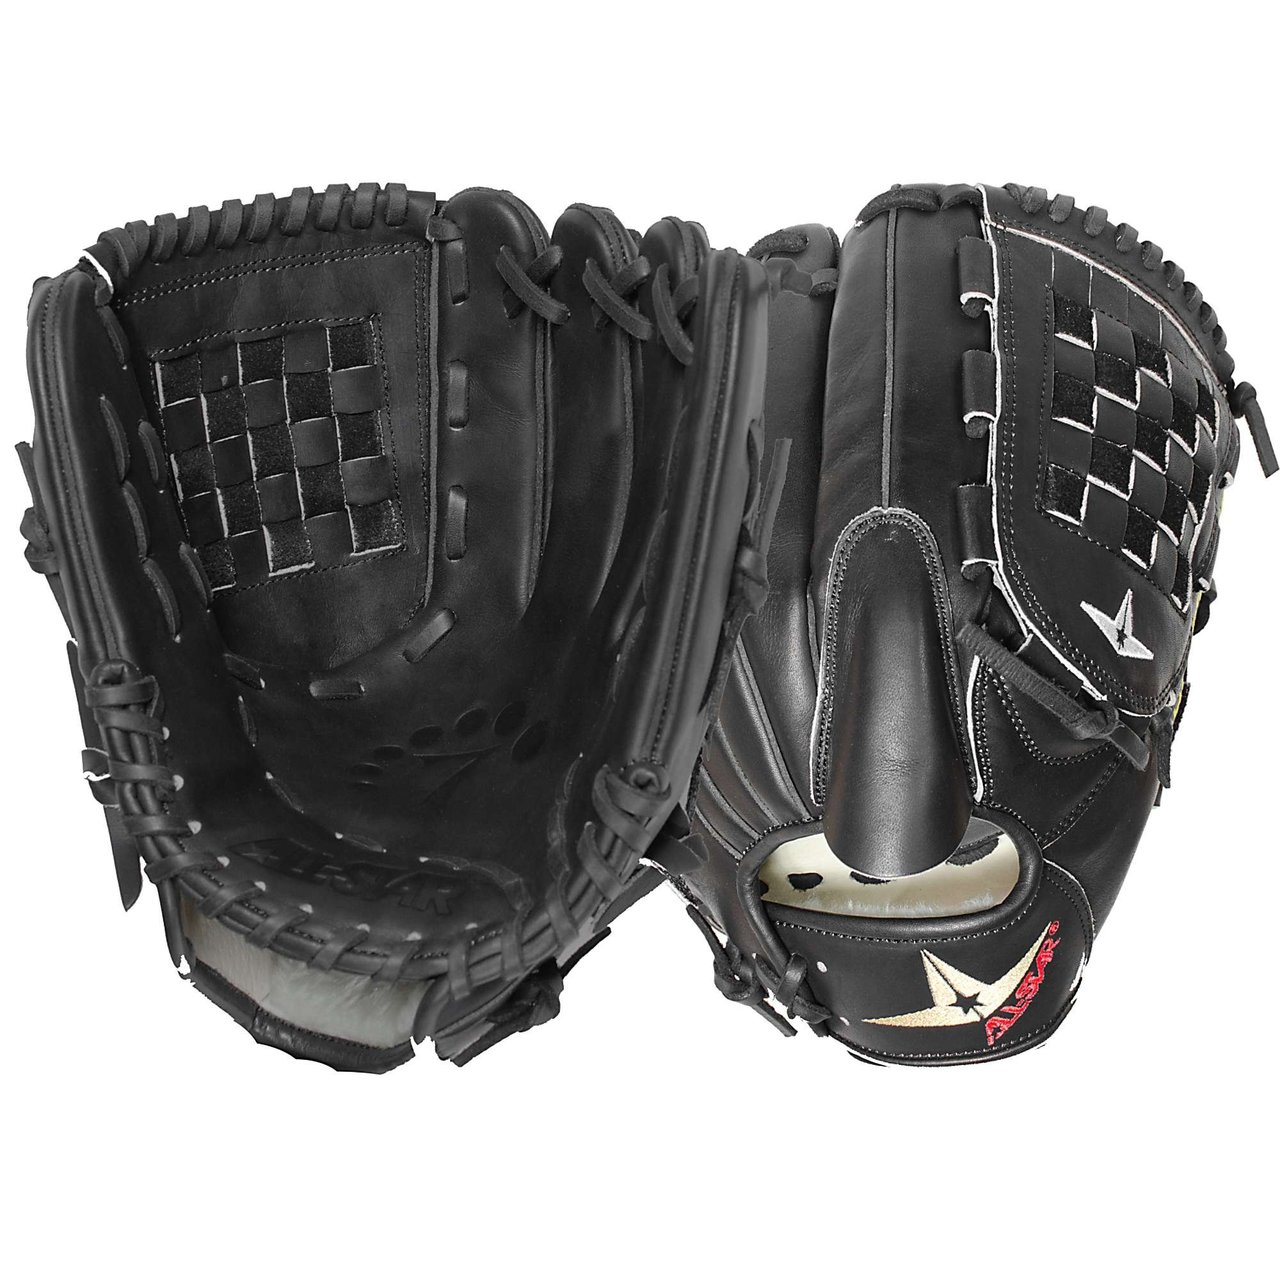 All Star System Seven FGS7-PTBK Baseball Glove 12 Inch (Right Handed Throw) : Designed with the same high quality leather which made the CM3000 series catching mitts so popular, these System Seven fielding gloves have a similar personality: Fast break in and long lasting. High quality selection of Japanese Maruhashi black and tan leather. By design, All Star's tan leather breaks in fast and forms a great pocket. All Star lines the back of our gloves with black leather because it is more durable and stiffer, providing support for a long lasting glove. Pro Guard Padding provides a thin layer of extra padding in the palm area of the glove which helps kill the sting of a mis-caught ball. Pro Guard Padding is thin enough to still have enough feeling, so that you know exactly where the ball is located. System Seven fielding gloves are designed for specific position's needs. These gloves feel like an extension of your arm, empowering you with a long enough reach, maximum control, and complete confidence.